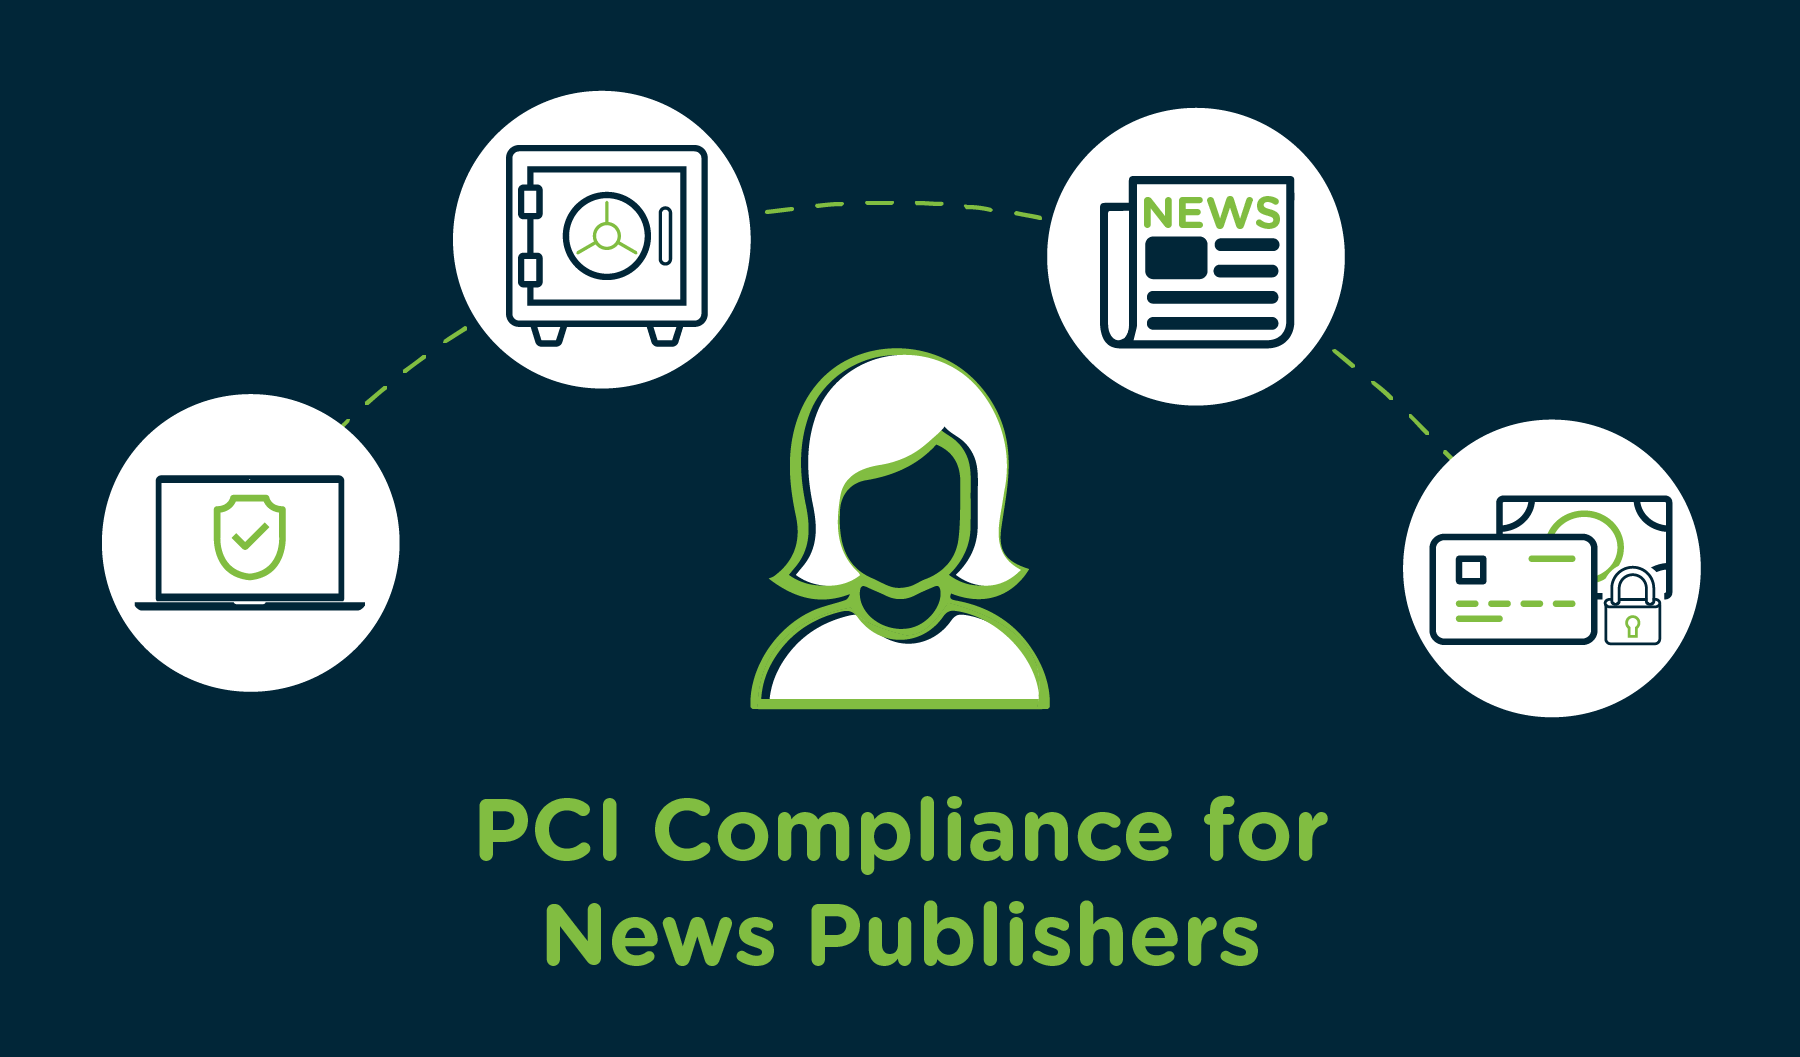 PCI Compliance for News Publishers and the Media Industry